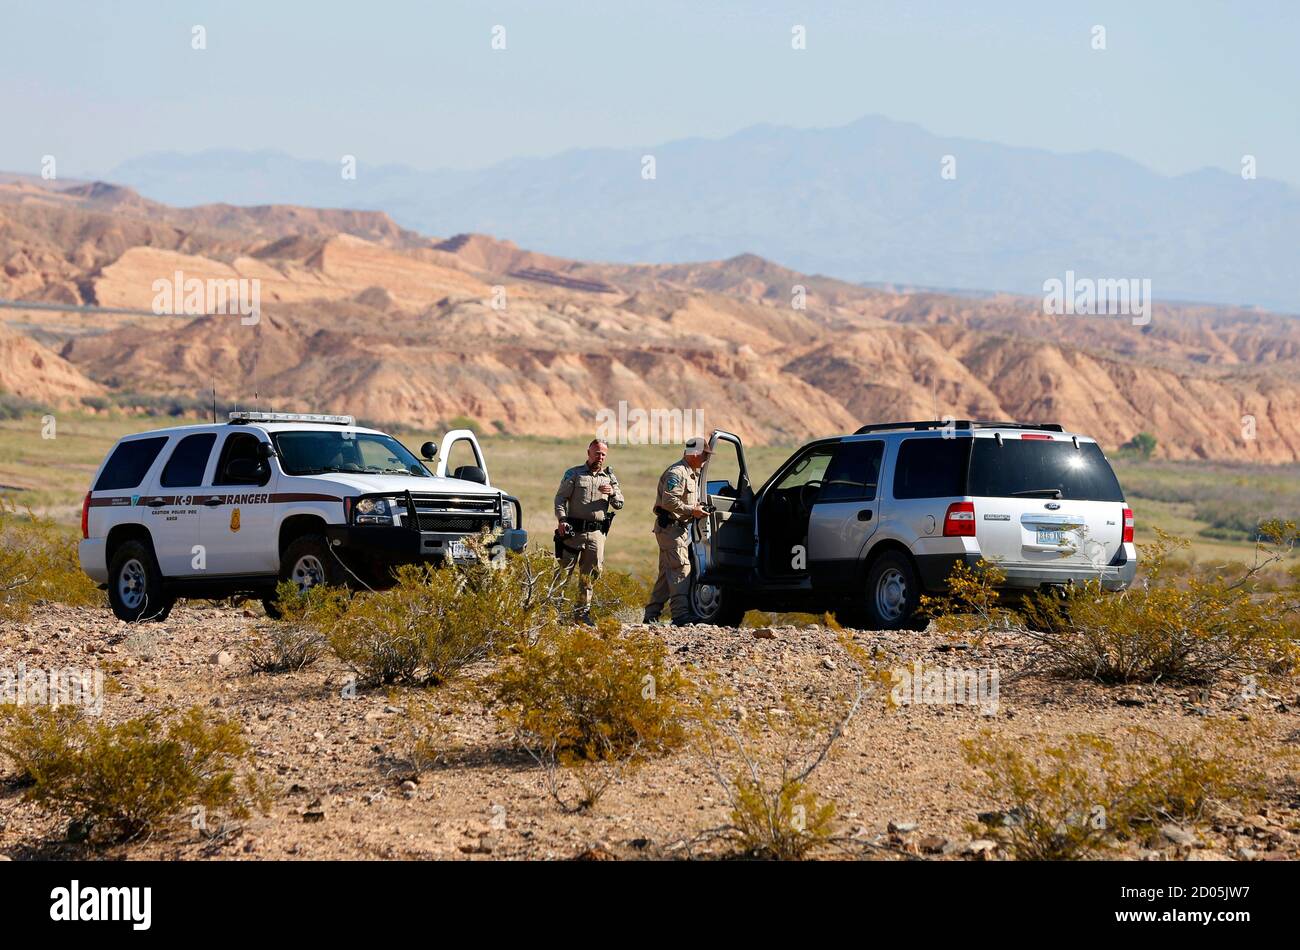 Federal law enforcement personnel block access to thousands of acres of  Bureau of Land Management (BLM) land that have been temporarily closed so  they can round up illegal cattle that are grazing,